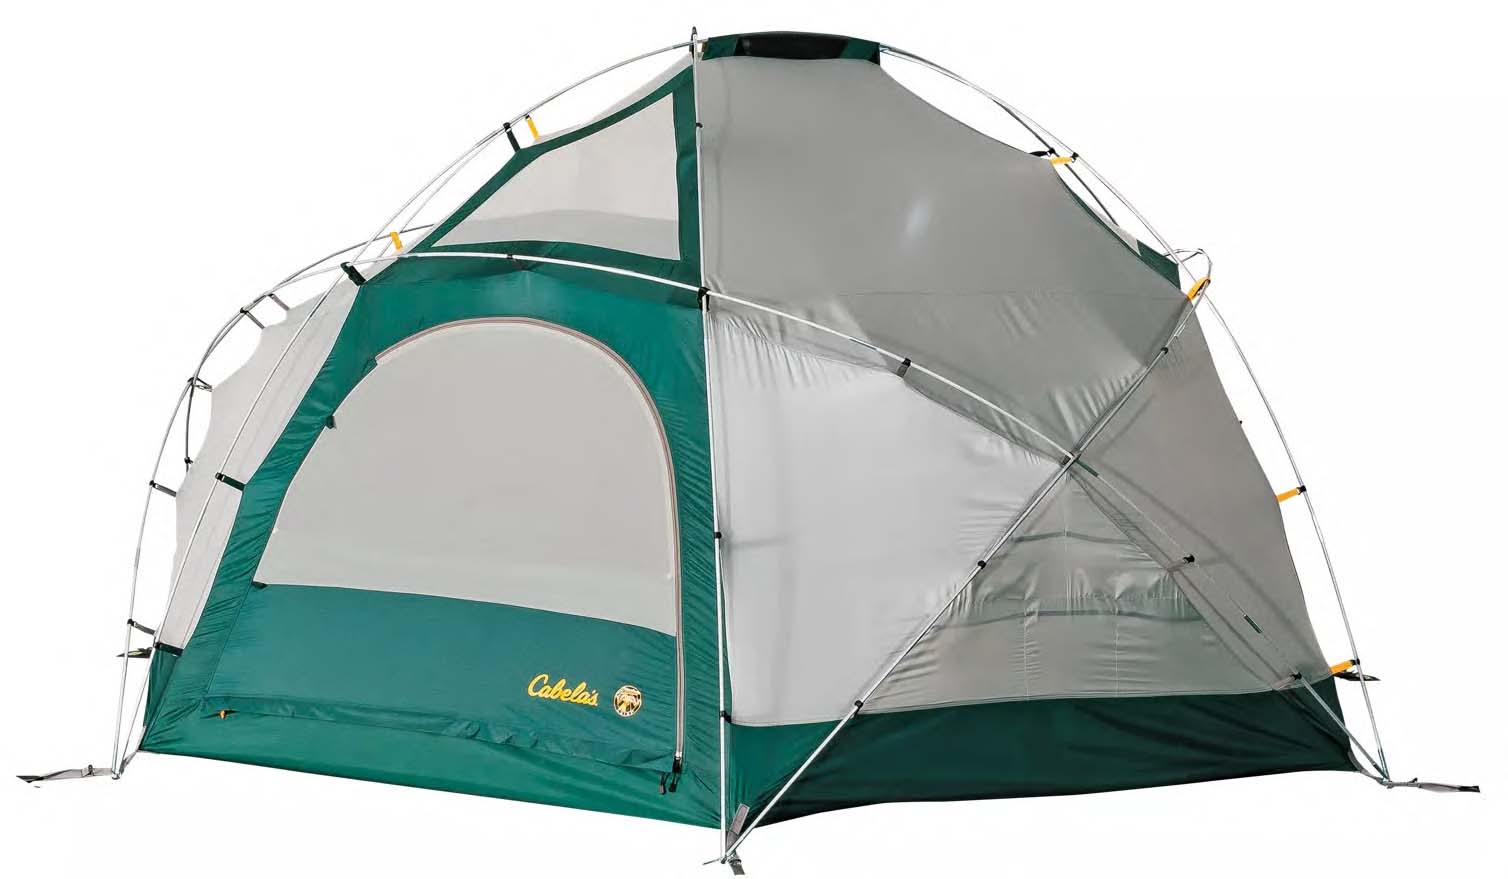 The 10 Types of Camping Tents (with Photos) - Mom Goes Camping